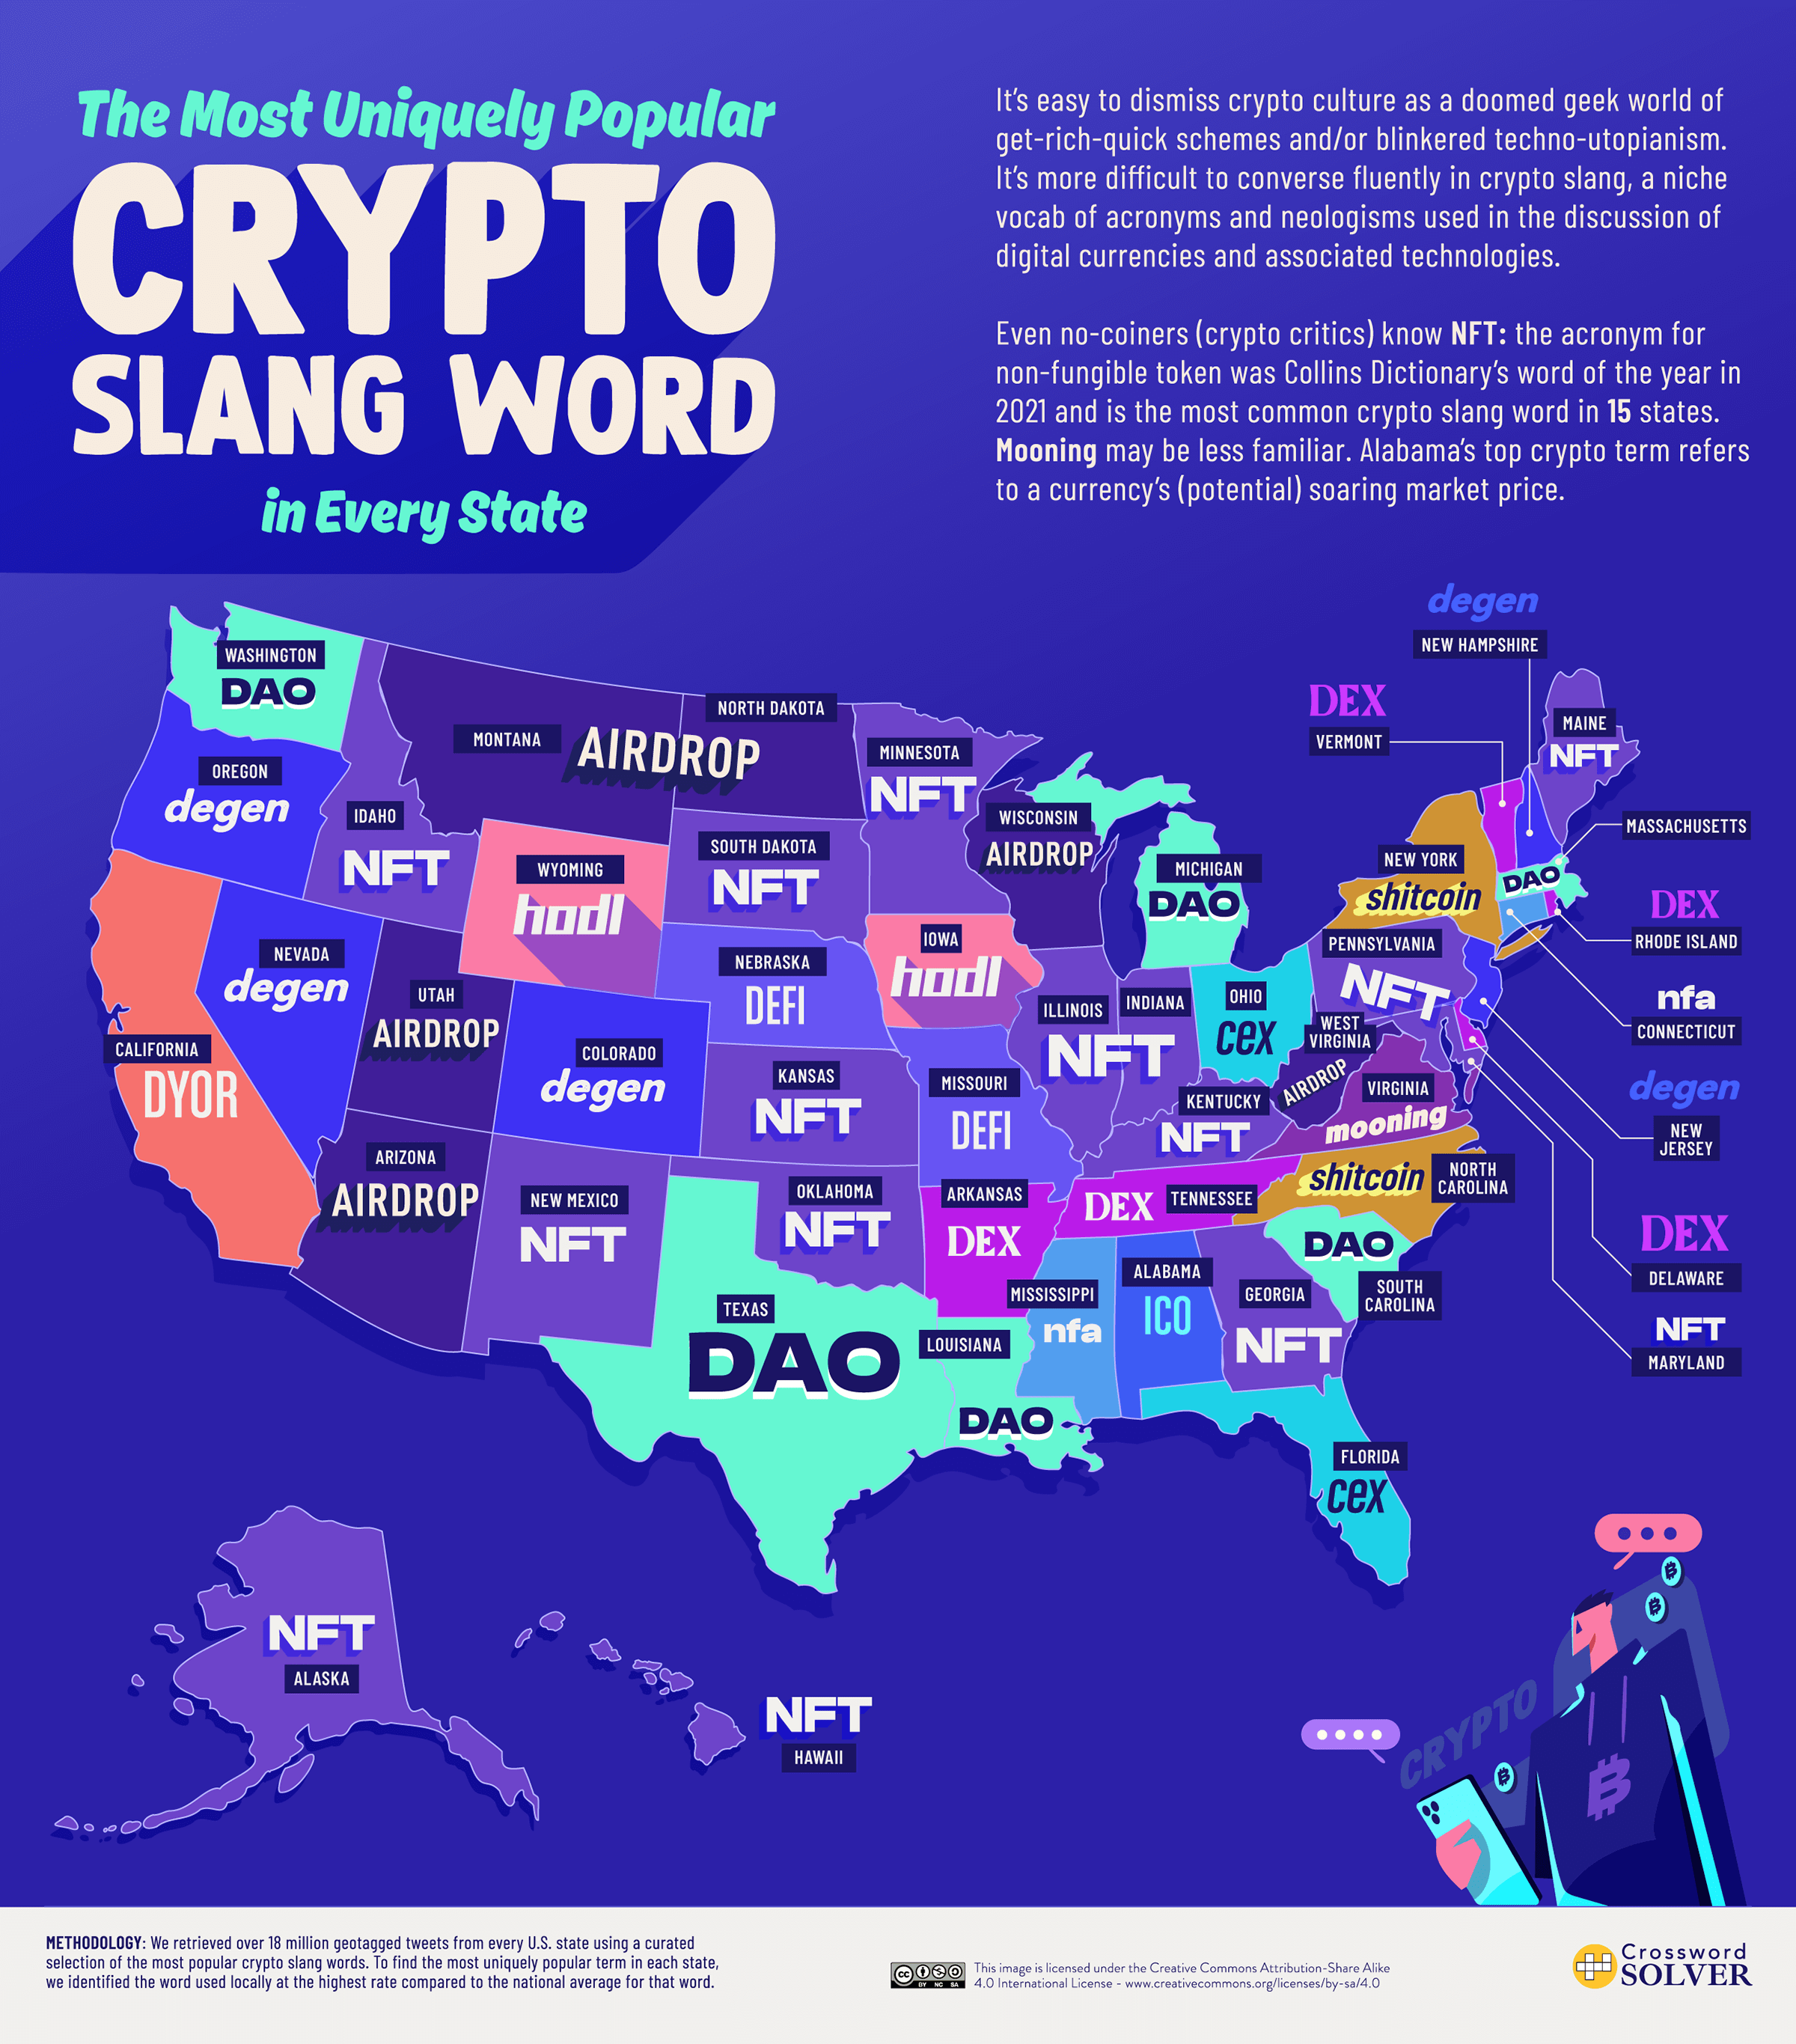 Most popular crypto slang by state (Source: Crossword Solver)